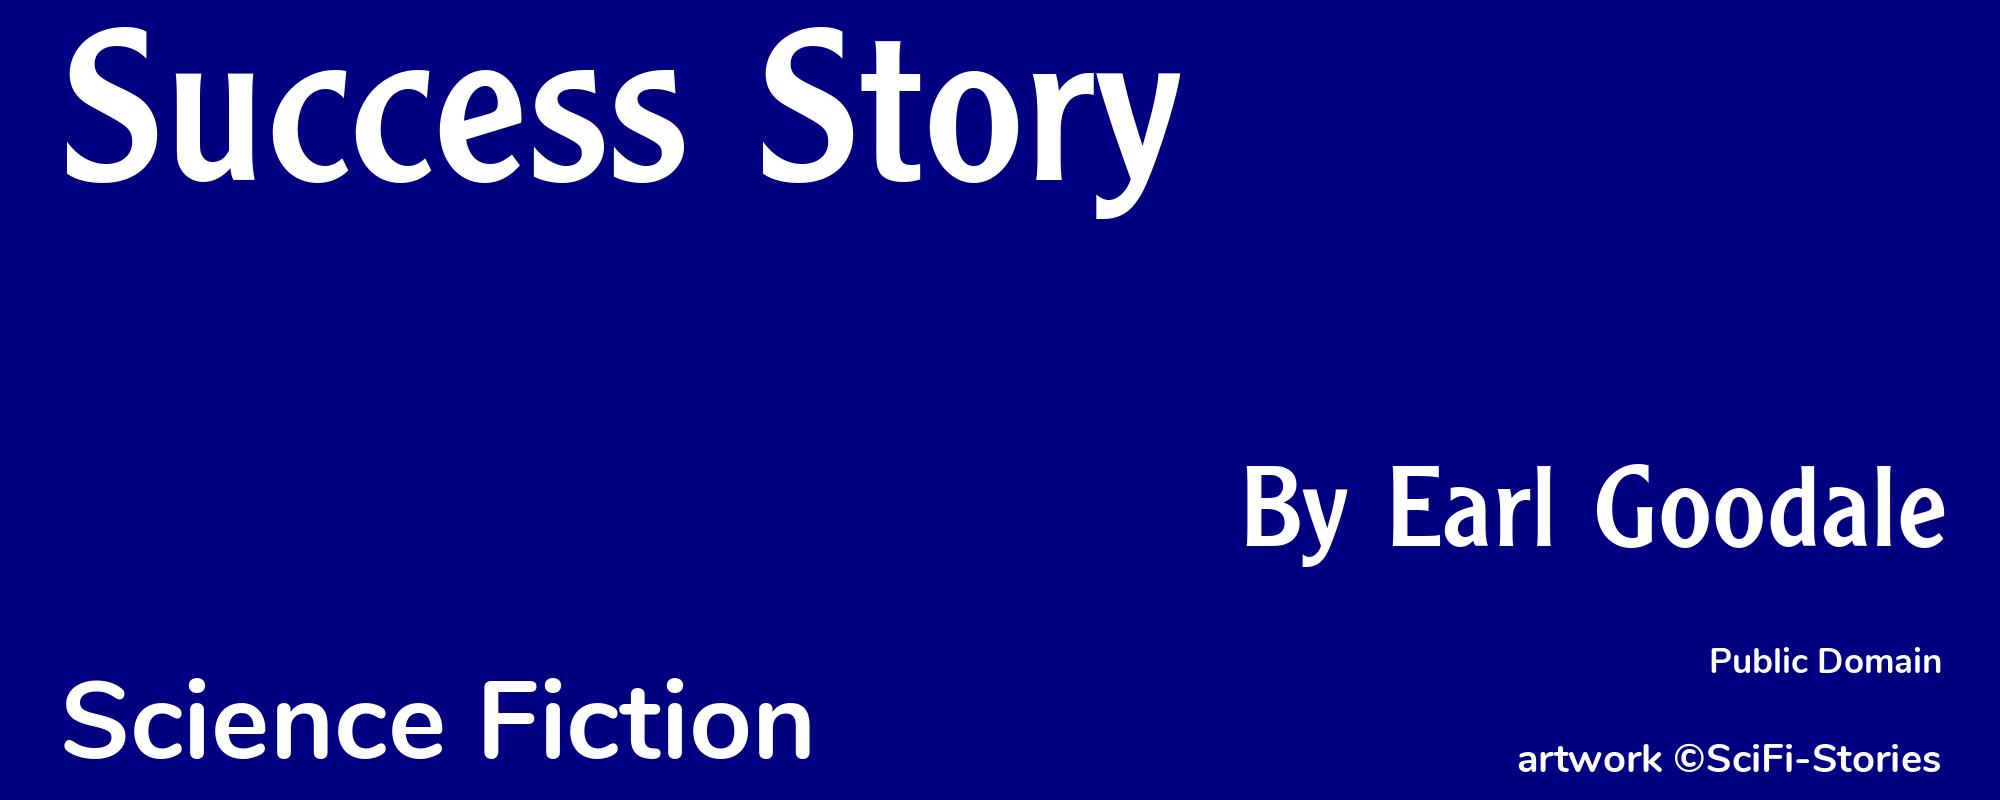 Success Story - Cover